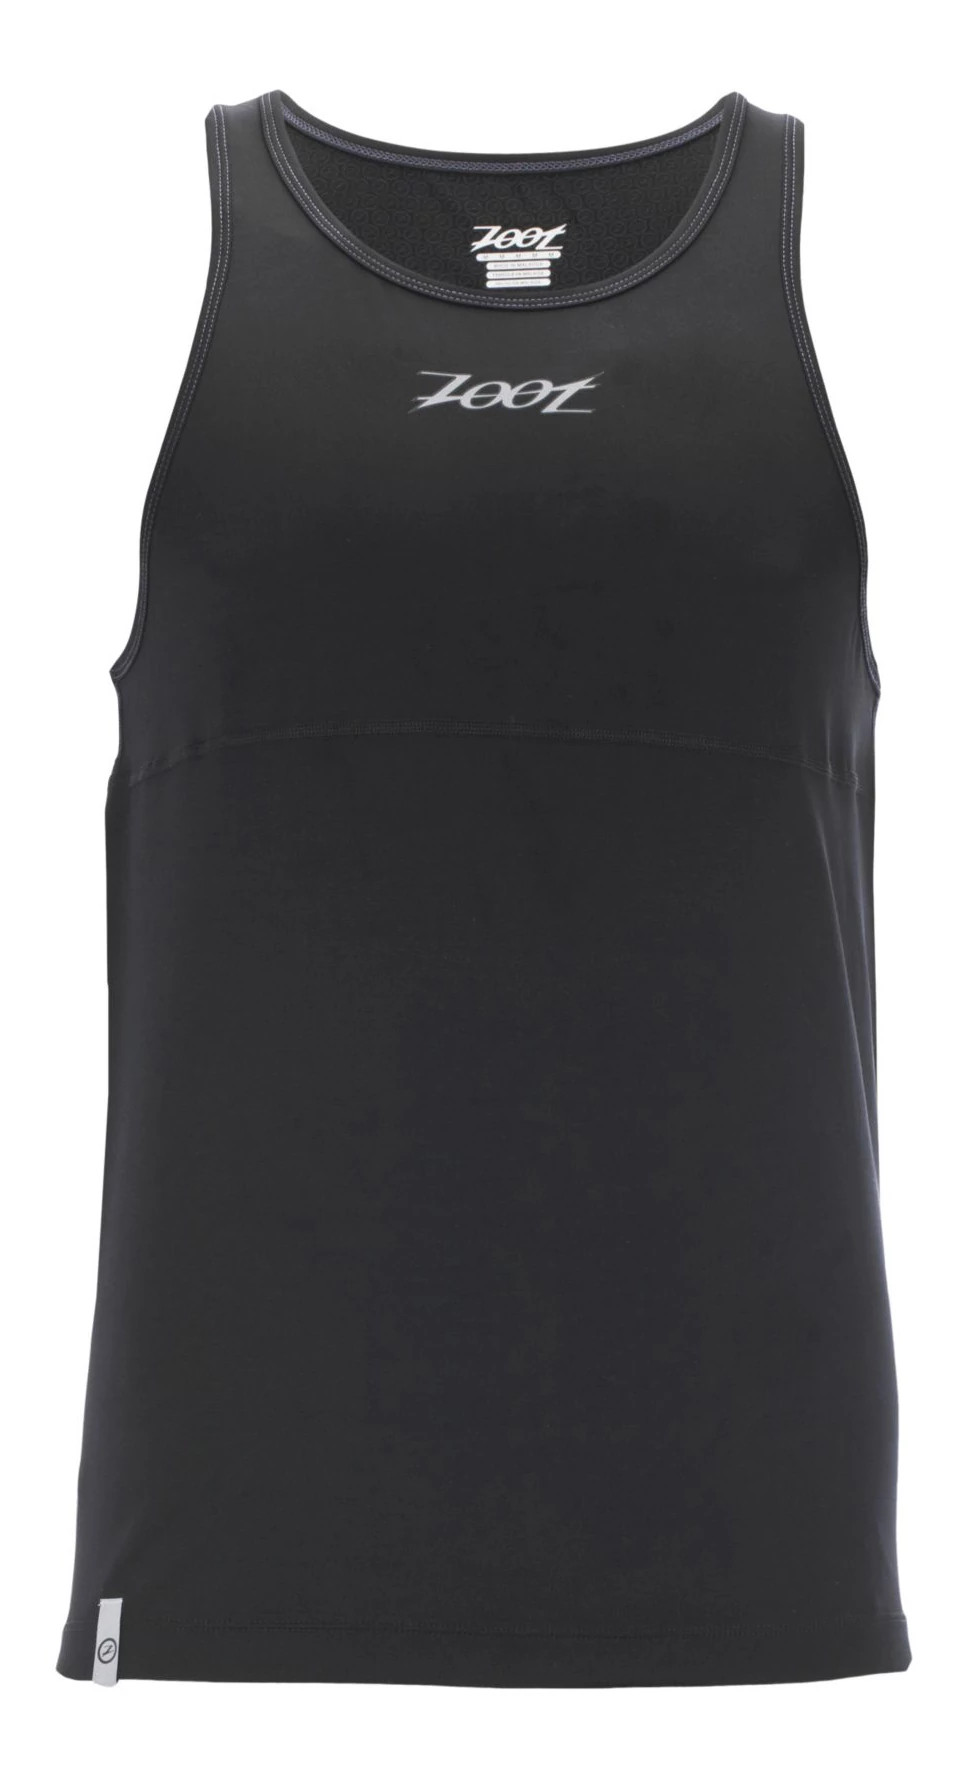 Mens Zoot Chill Out Singlet Sleeveless & Tank Technical Tops